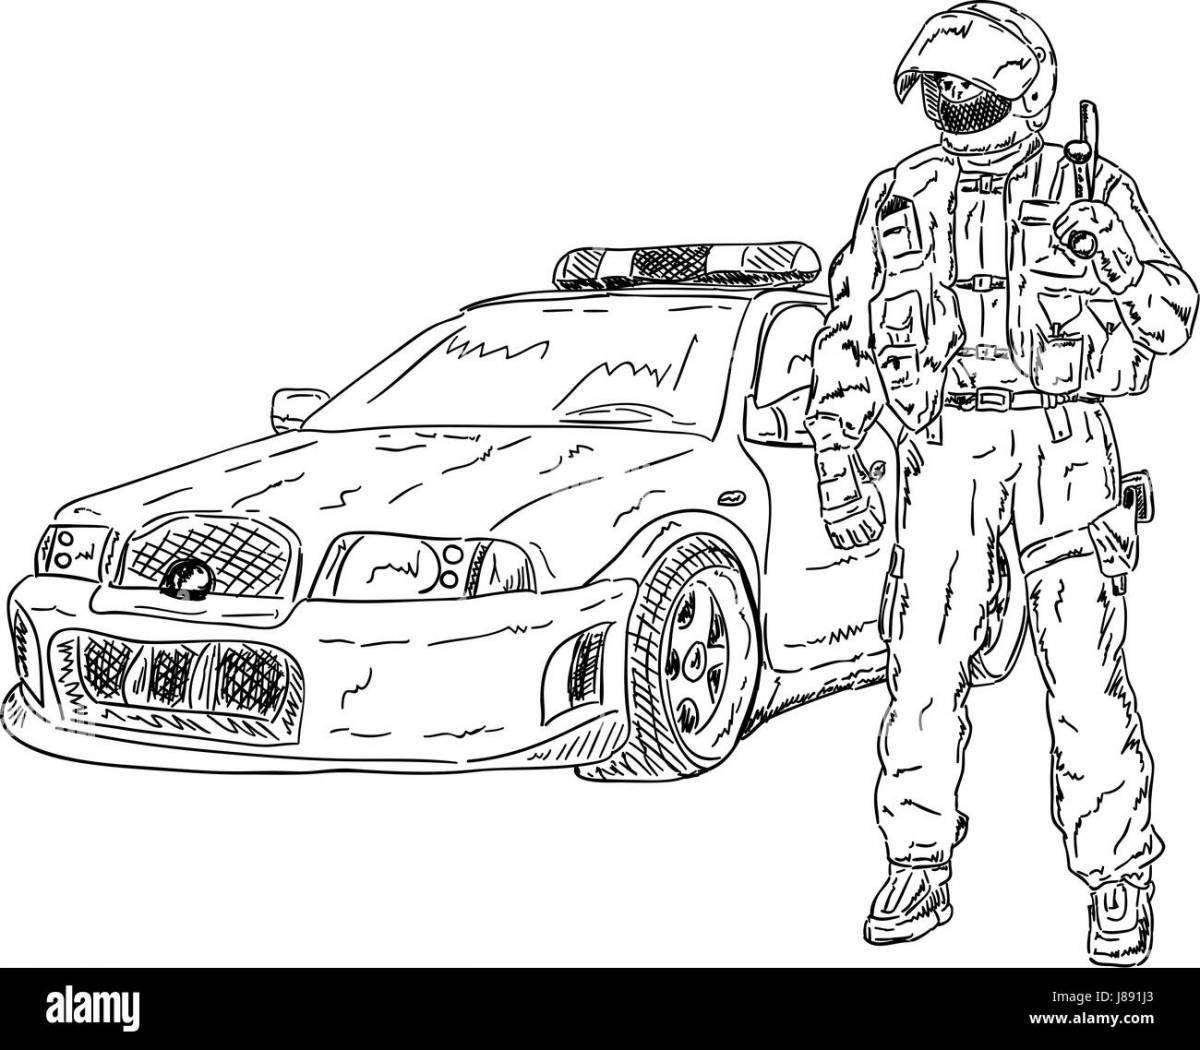 Bmw live police coloring